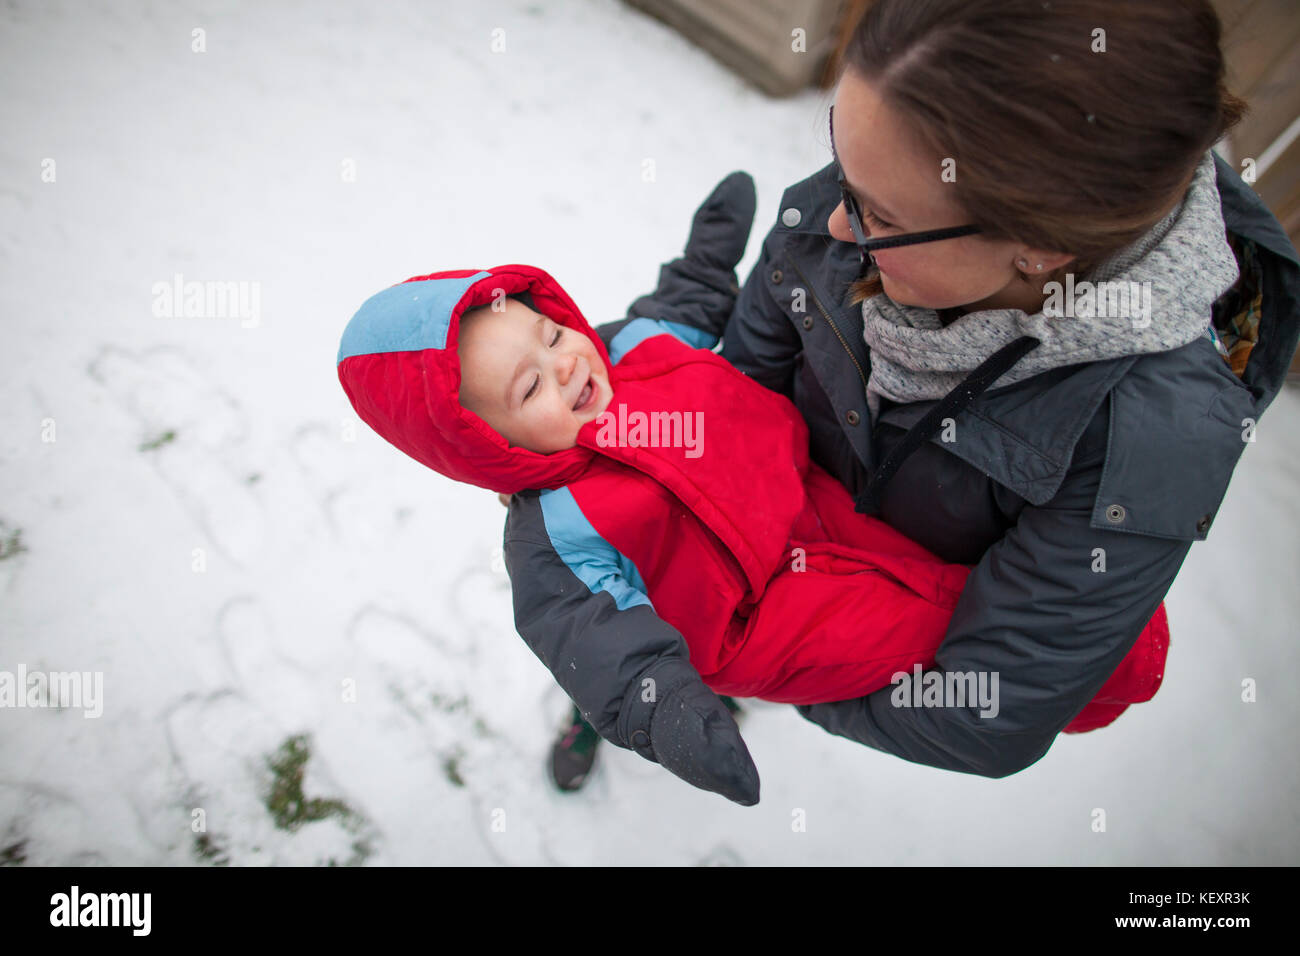 Mother holding laughing baby outdoors in winter while wearing warm clothing, Langley, British Columbia, Canada Stock Photo